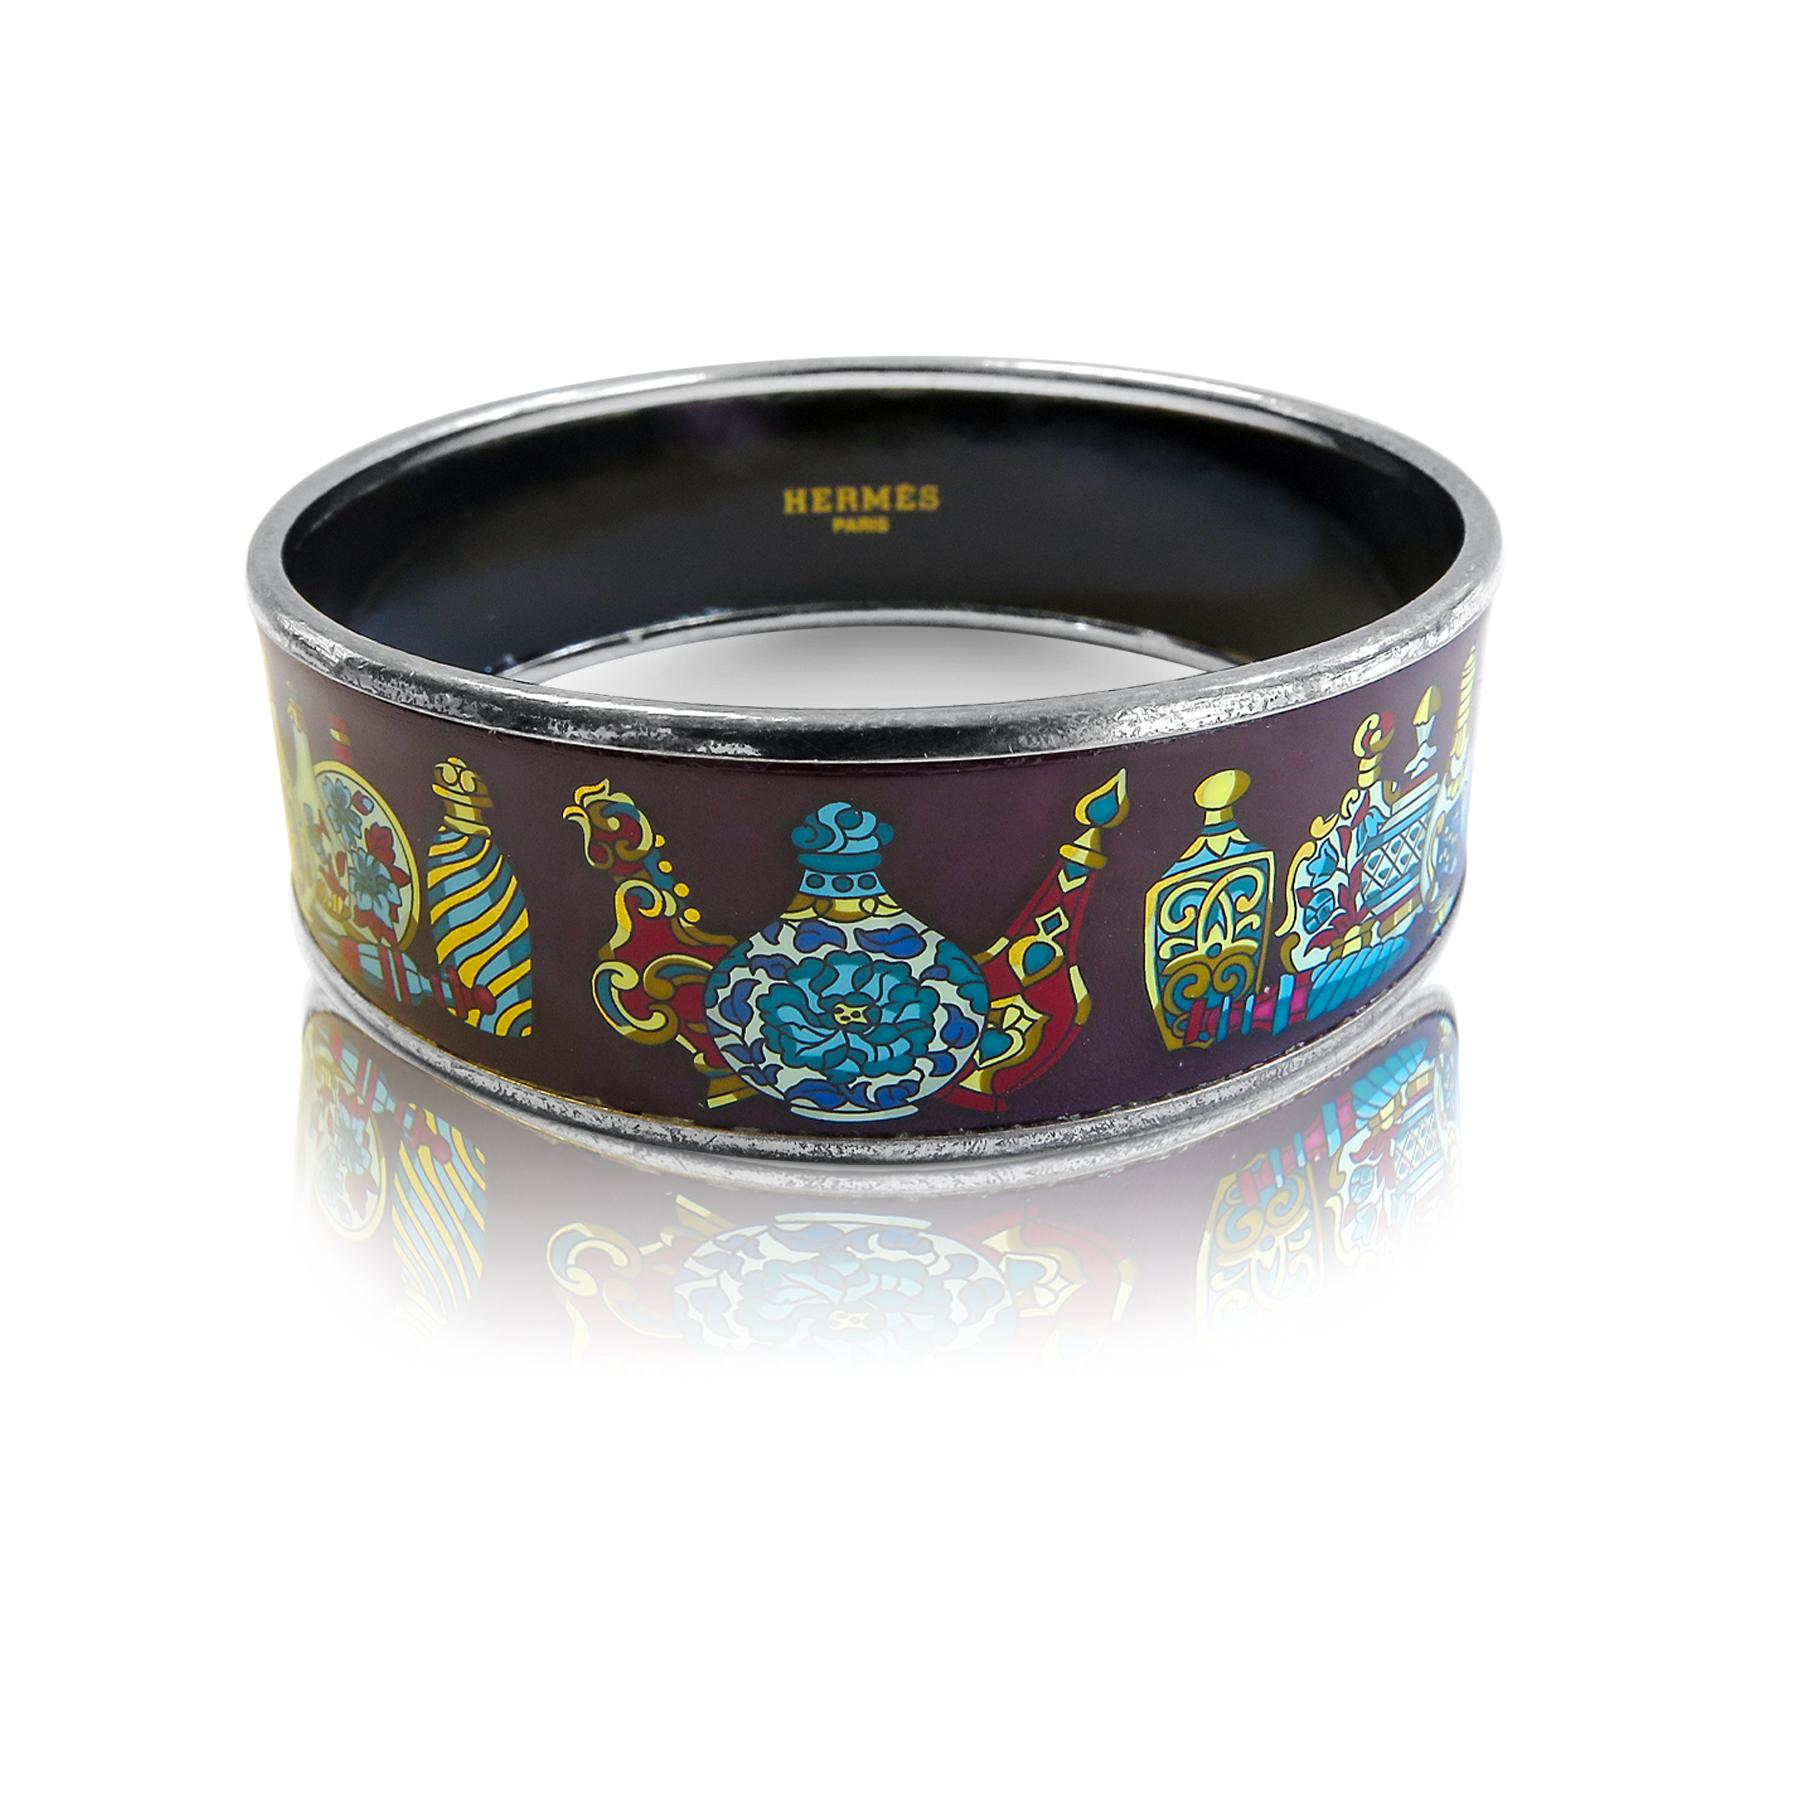 This Hermes bangle features platinum plated with a printed jars pattern enamel. Carved in Austria, It weighs 48 grams, 22mm wide and has an inner diameter of 2.5 inches to give a comfortable fit in your wrist.
